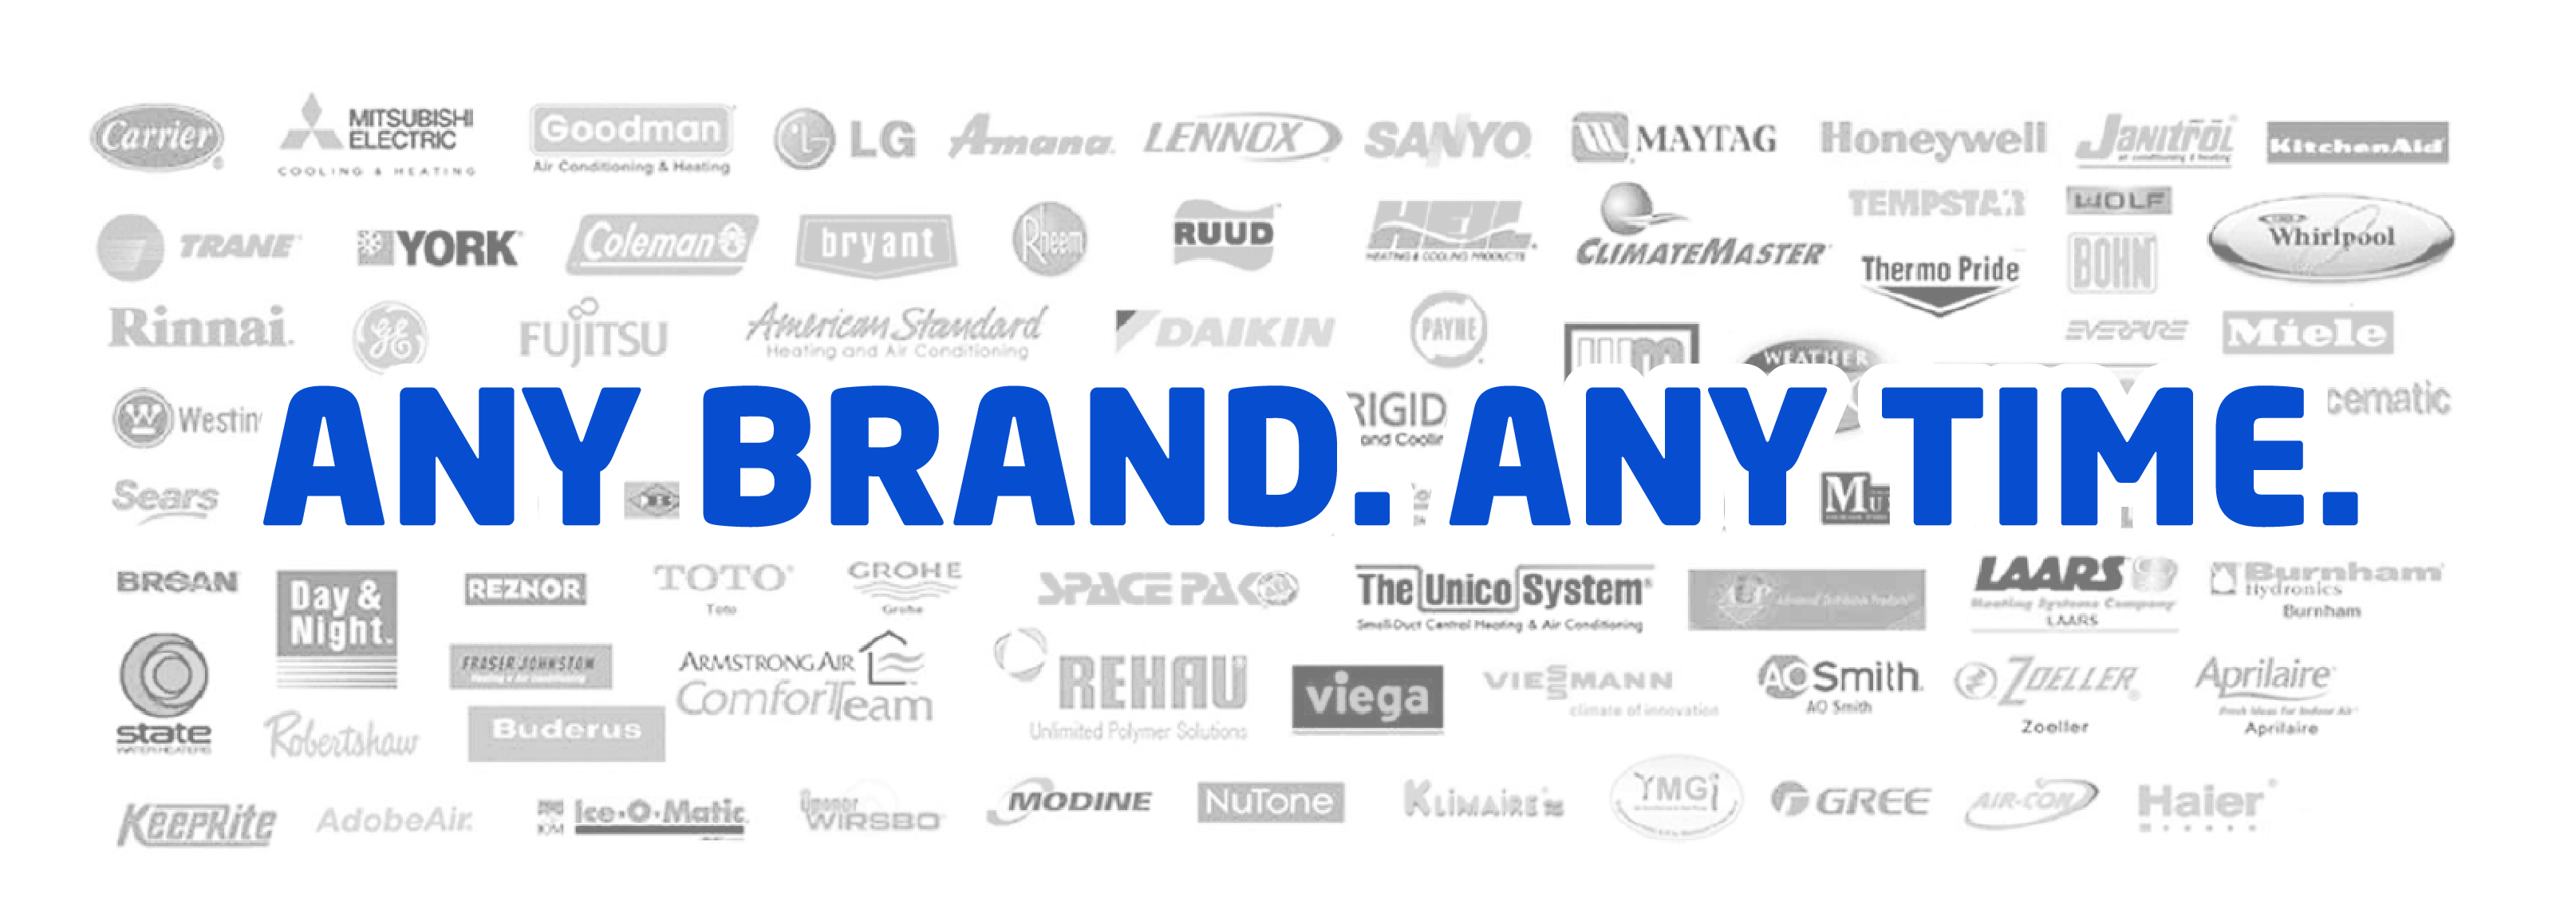 Any Brand Any Time